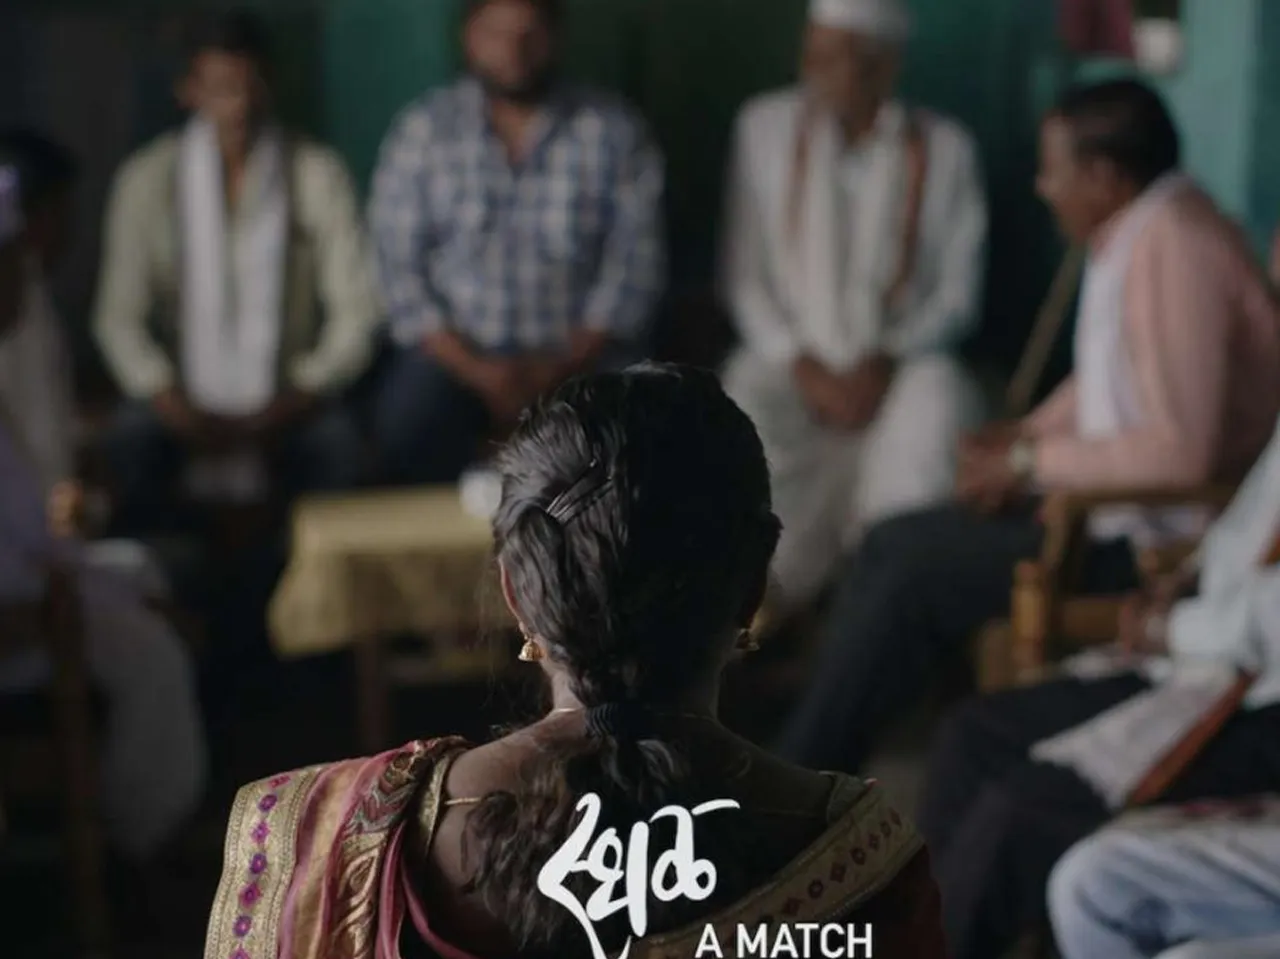 Sthal review: A brutally honest portrayal on arranged marriages in India, colorism, dowry and many other vices of our society